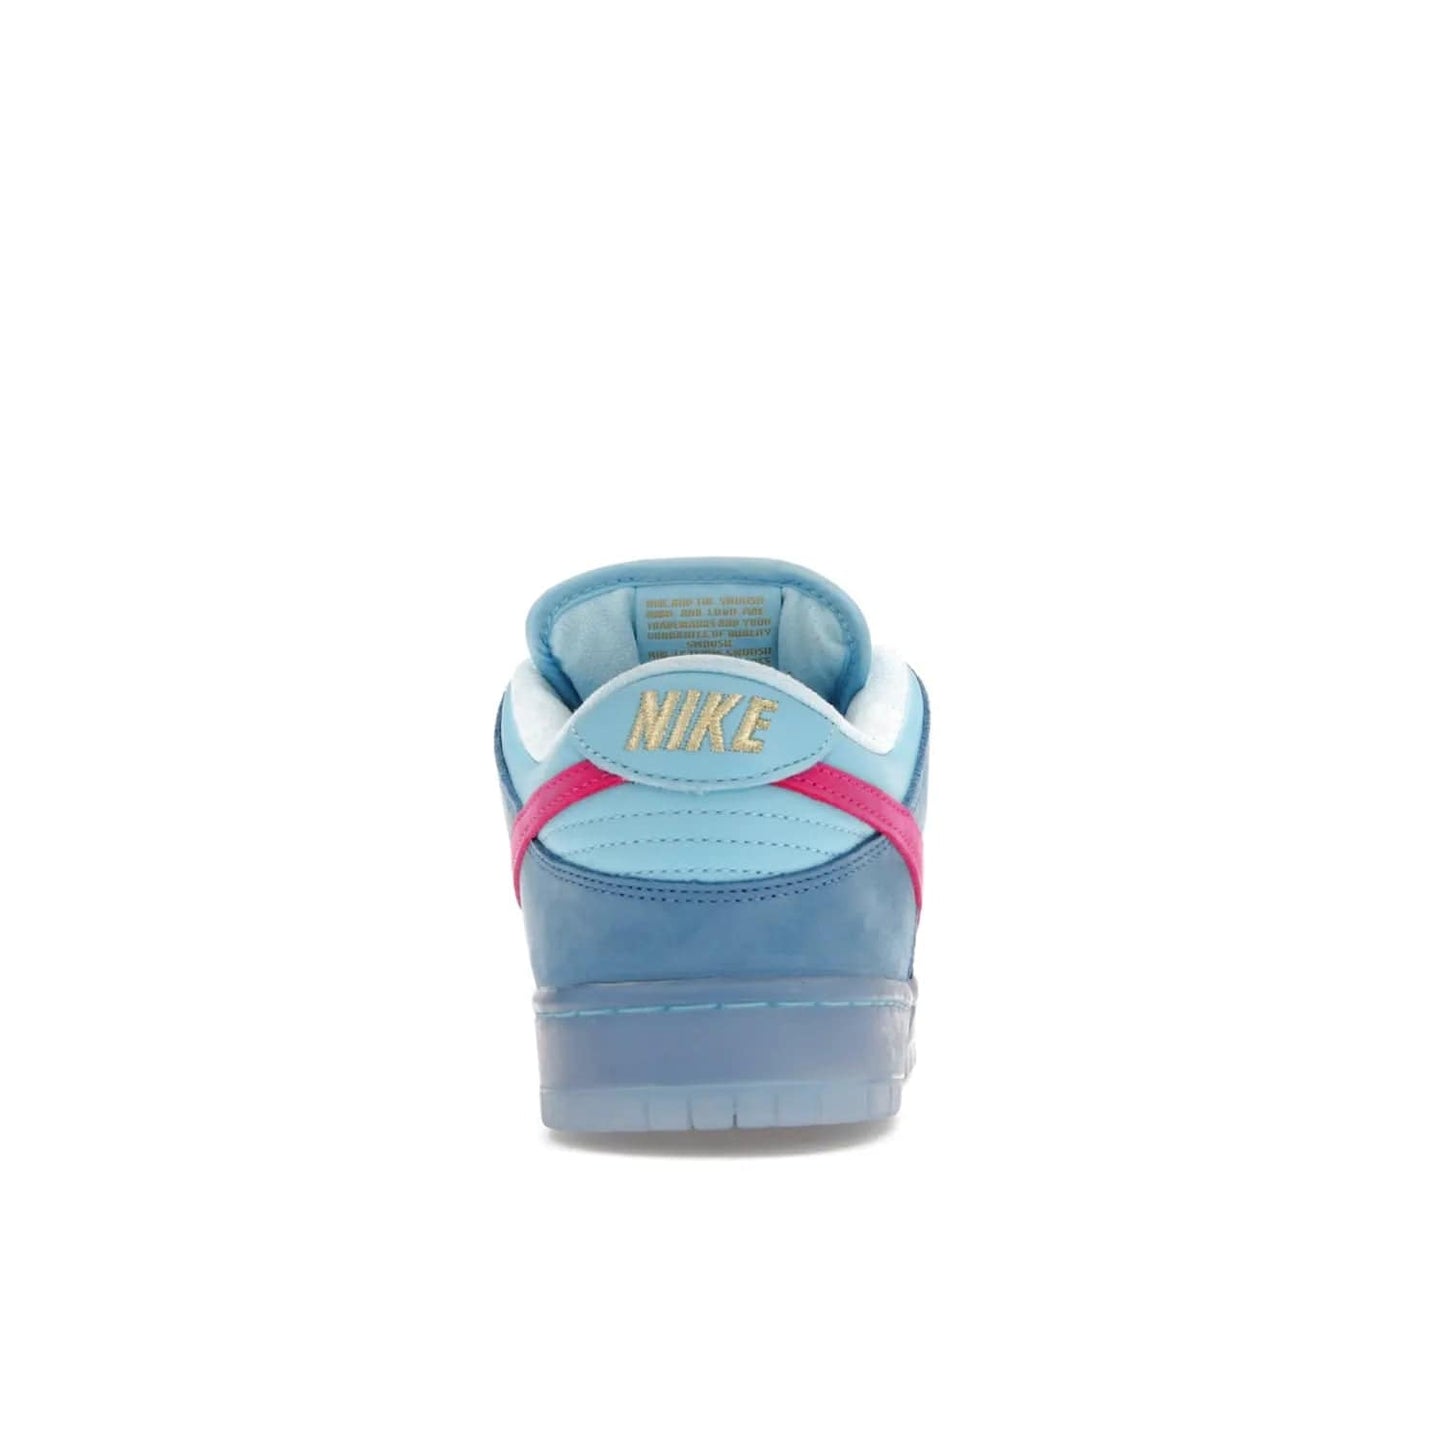 Nike SB Dunk Low Run The Jewels - Image 28 - Only at www.BallersClubKickz.com - The Nike SB Dunk Low Run The Jewels pays tribute to the Run the Jewels 3 album cover. It features a blue suede upper with pink suede accents, gold branding and 3 lace sets. RTJ insoles complete this limited edition sneaker. Get it now for your shoe collection.